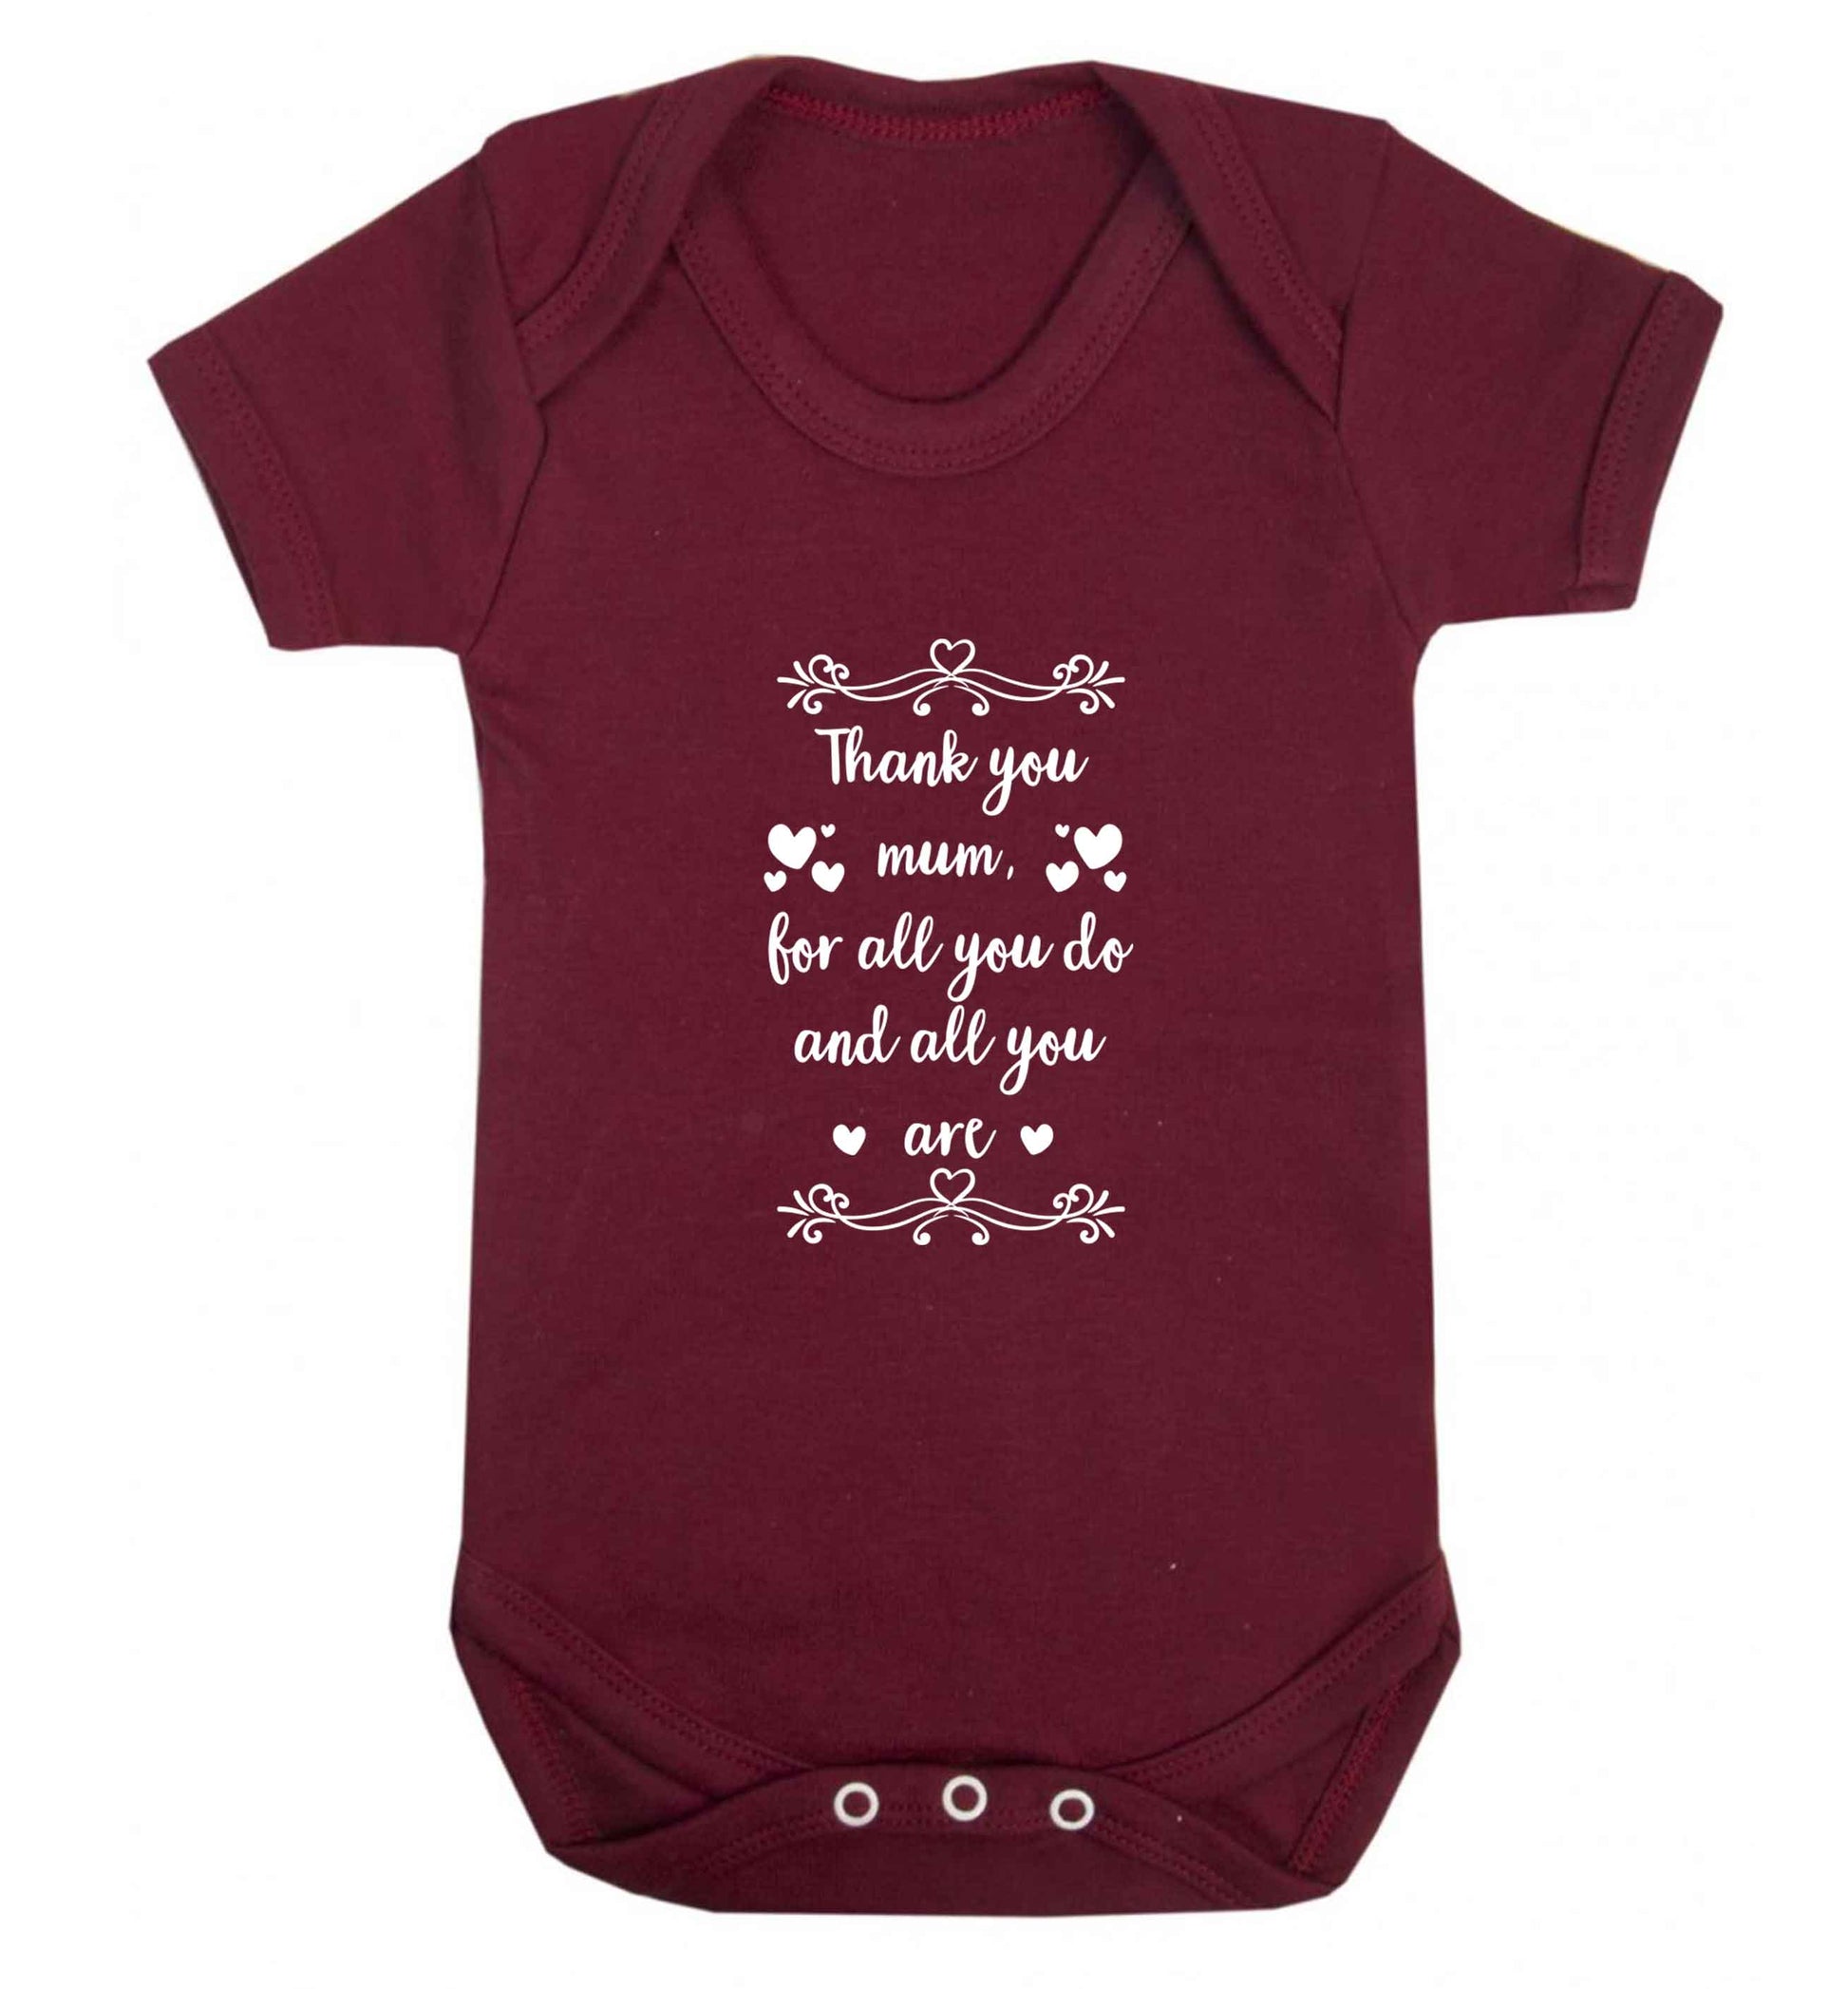 Gorgeous gifts for mums on mother's day! Thank you mum for all you do and all you are baby vest maroon 18-24 months